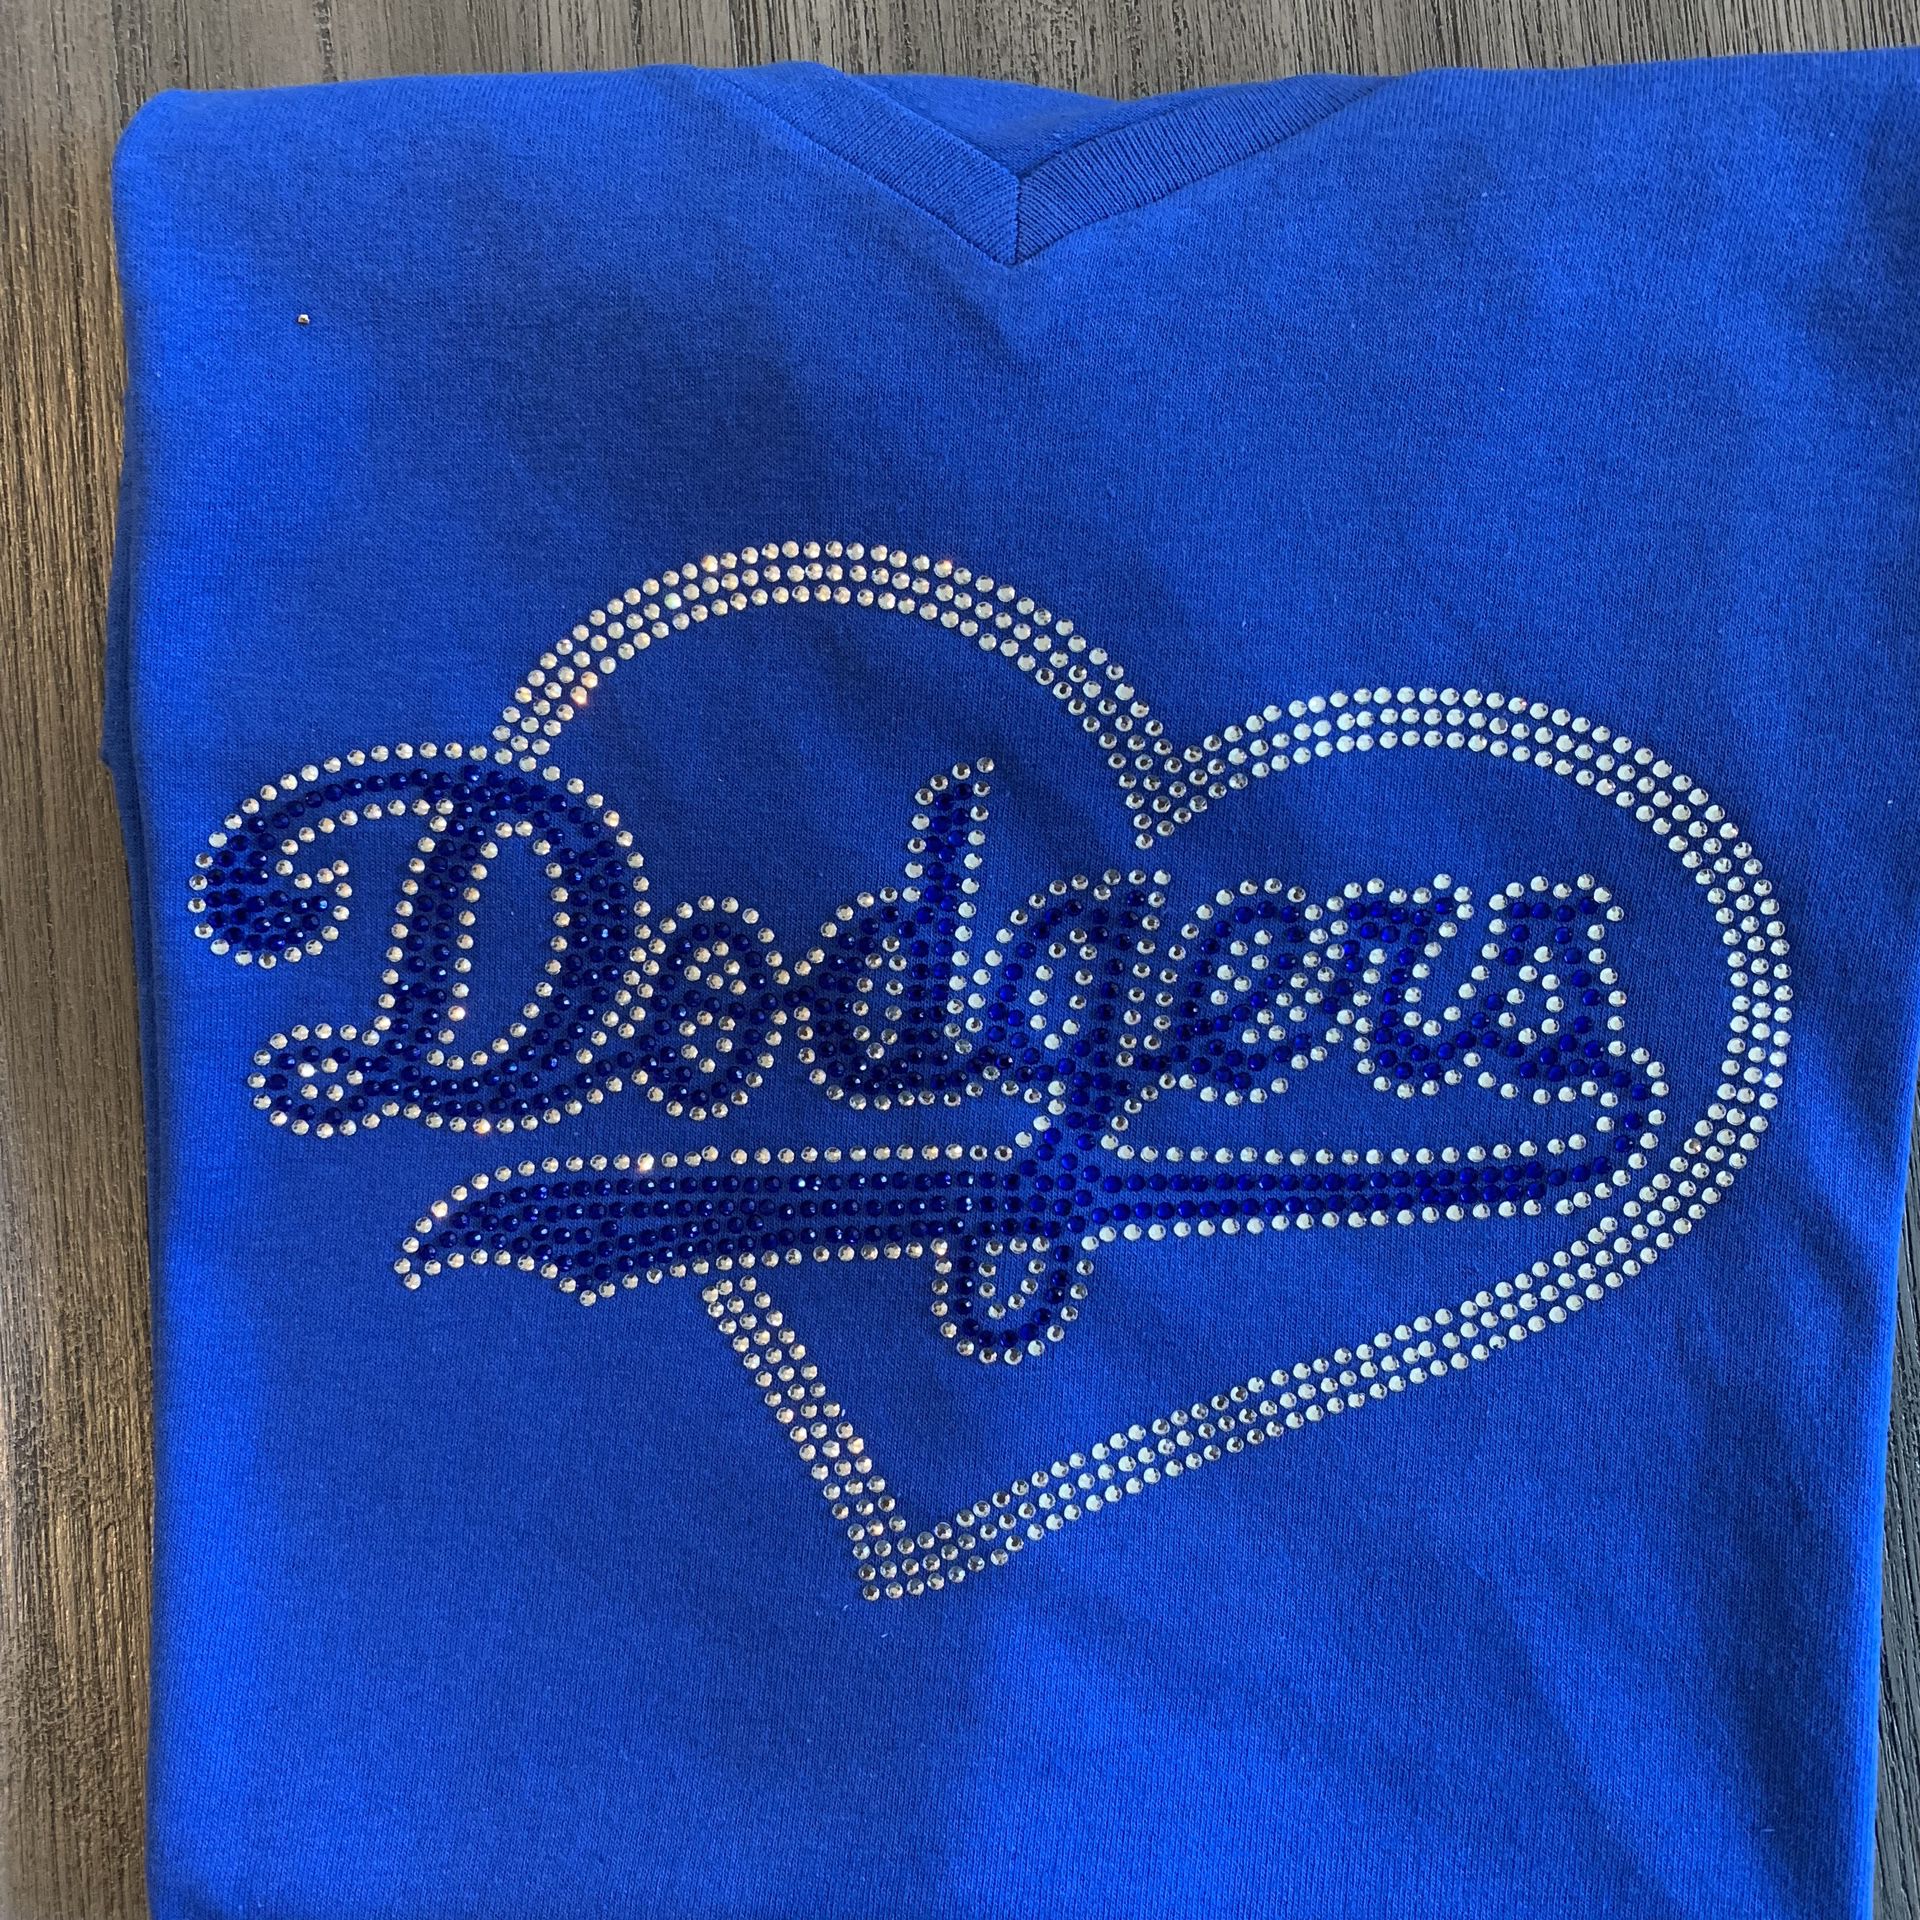 Los Angeles Dodgers Victoria's Secret Pink Bling Sequin Blue Tank Top Small  S for Sale in Los Angeles, CA - OfferUp